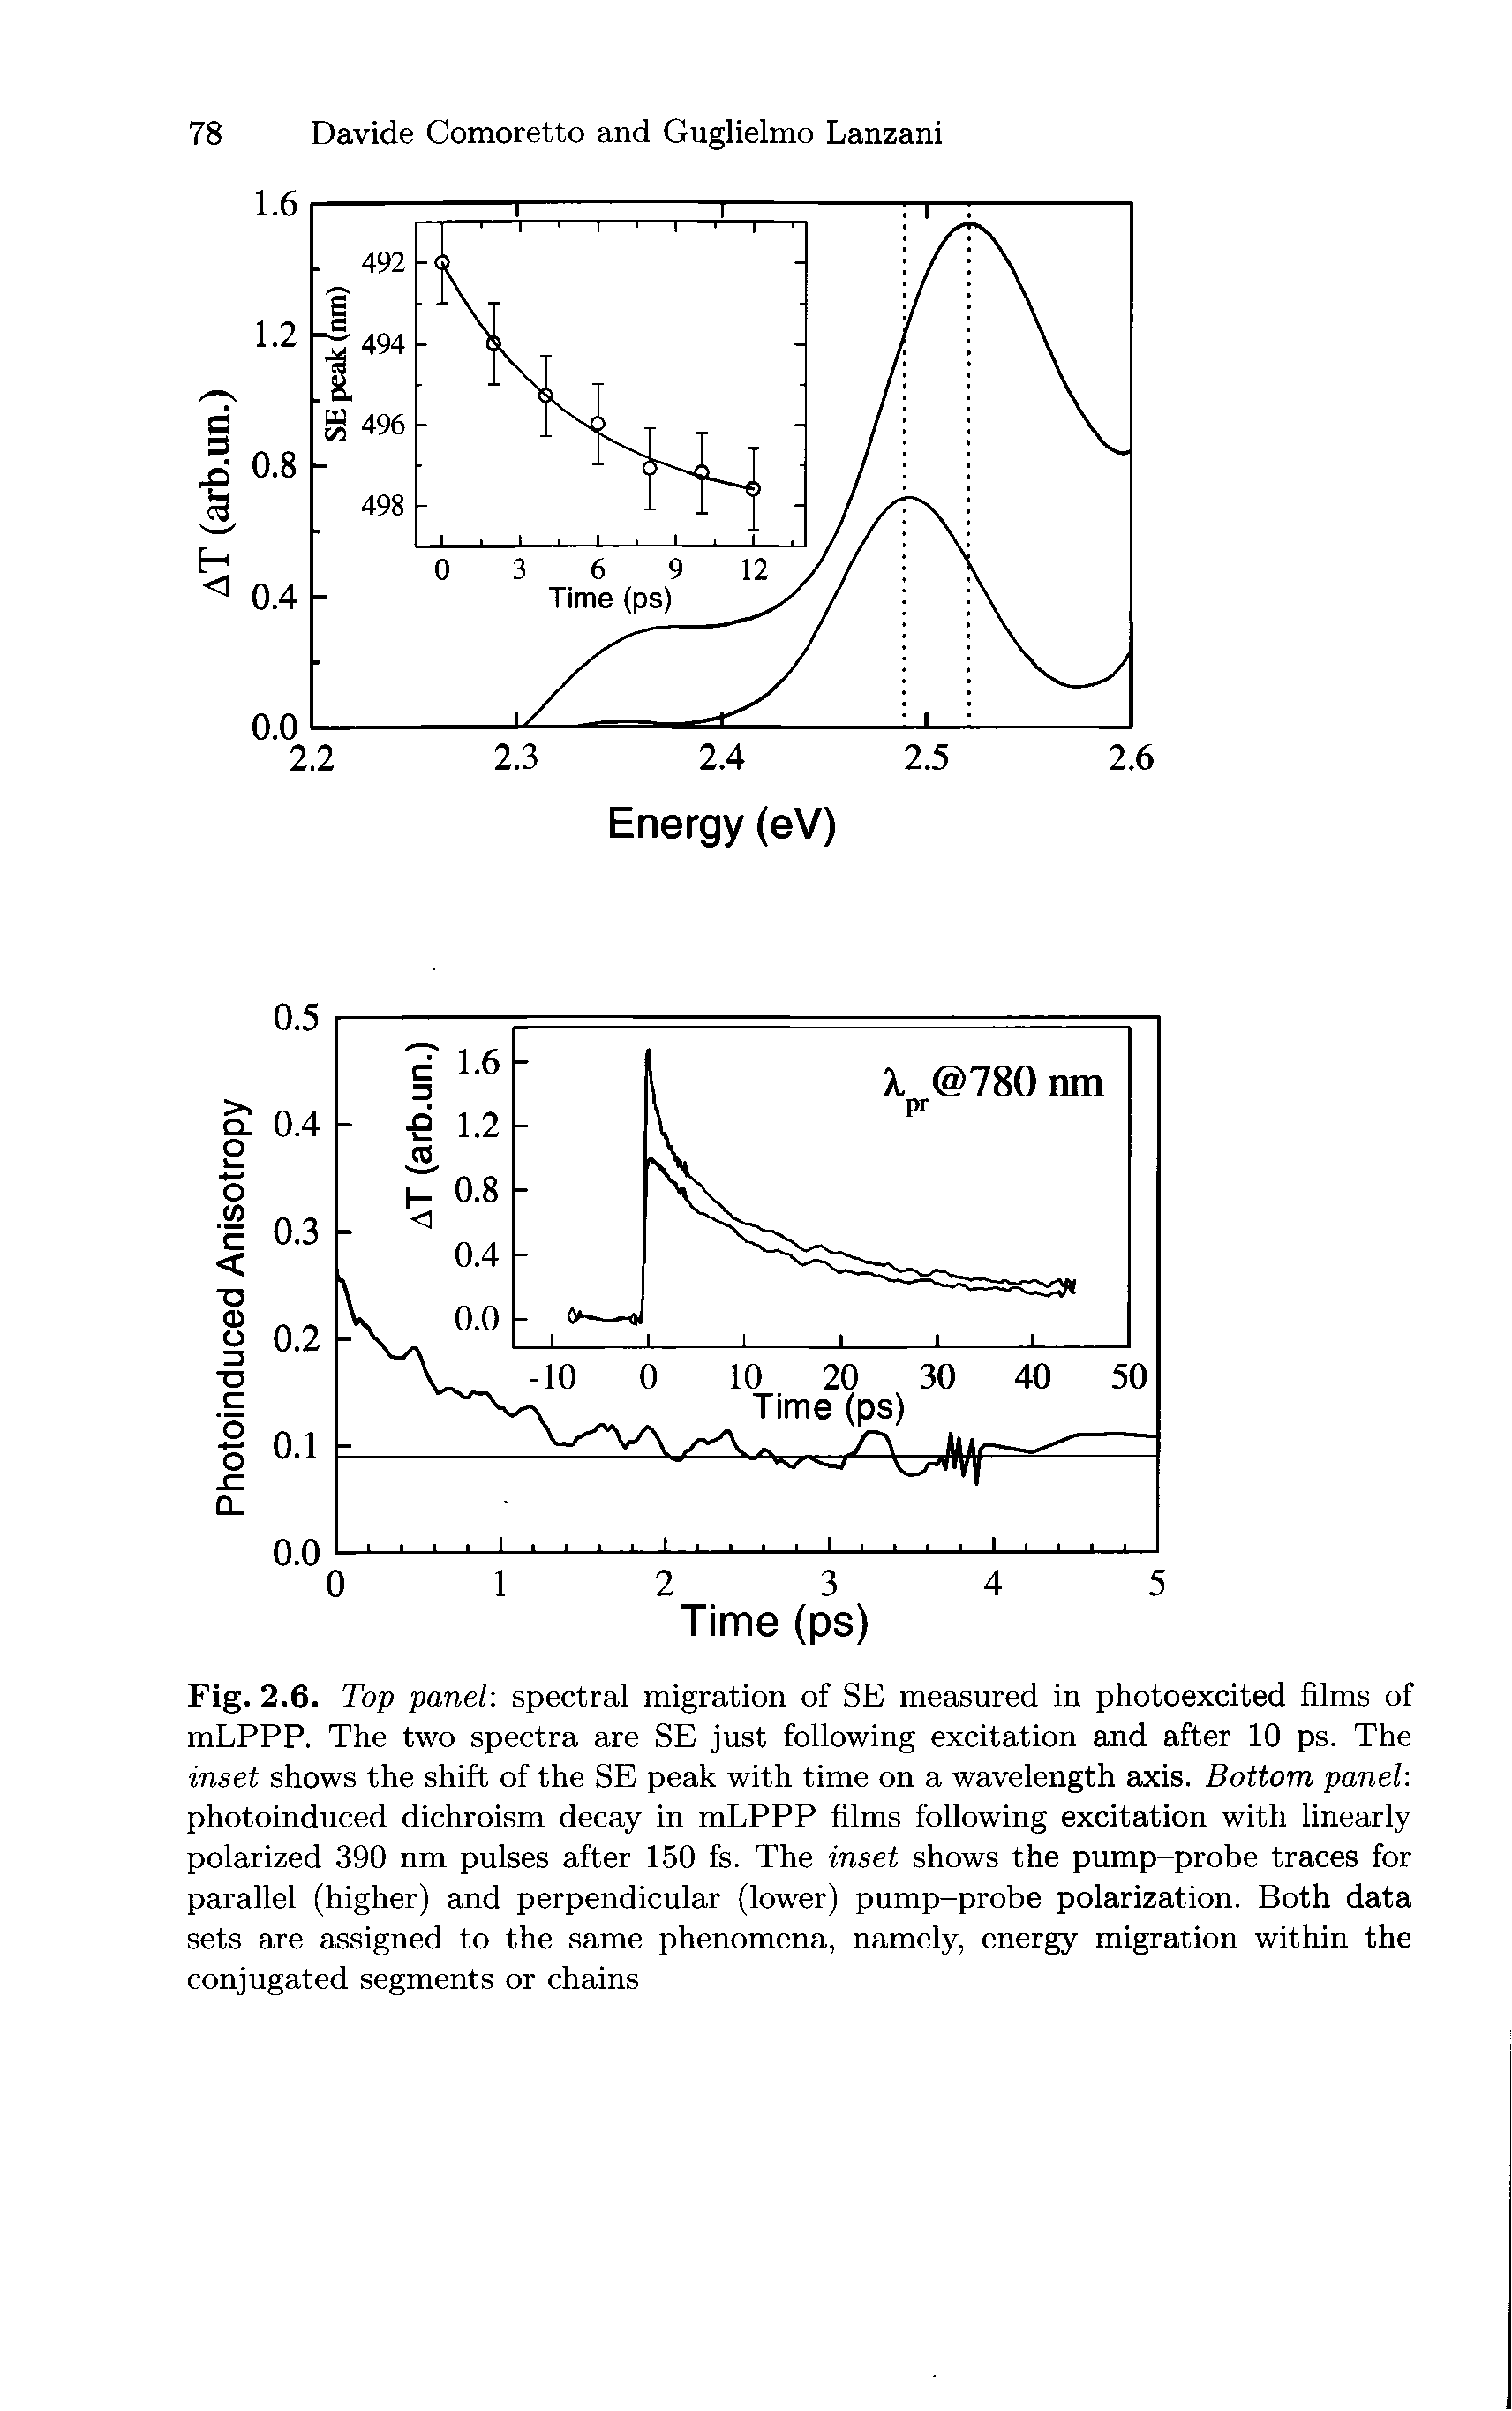 Fig. 2.6. Top panel spectral migration of SE measured in photoexcited films of mLPPP. The two spectra are SE just following excitation and after 10 ps. The inset shows the shift of the SE peak with time on a wavelength axis. Bottom panel photoinduced dichroism decay in mLPPP films following excitation with linearly polarized 390 nm pulses after 150 fs. The inset shows the pump-probe traces for parallel (higher) and perpendicular (lower) pump-probe polarization. Both data sets are assigned to the same phenomena, namely, energy migration within the conjugated segments or chains...